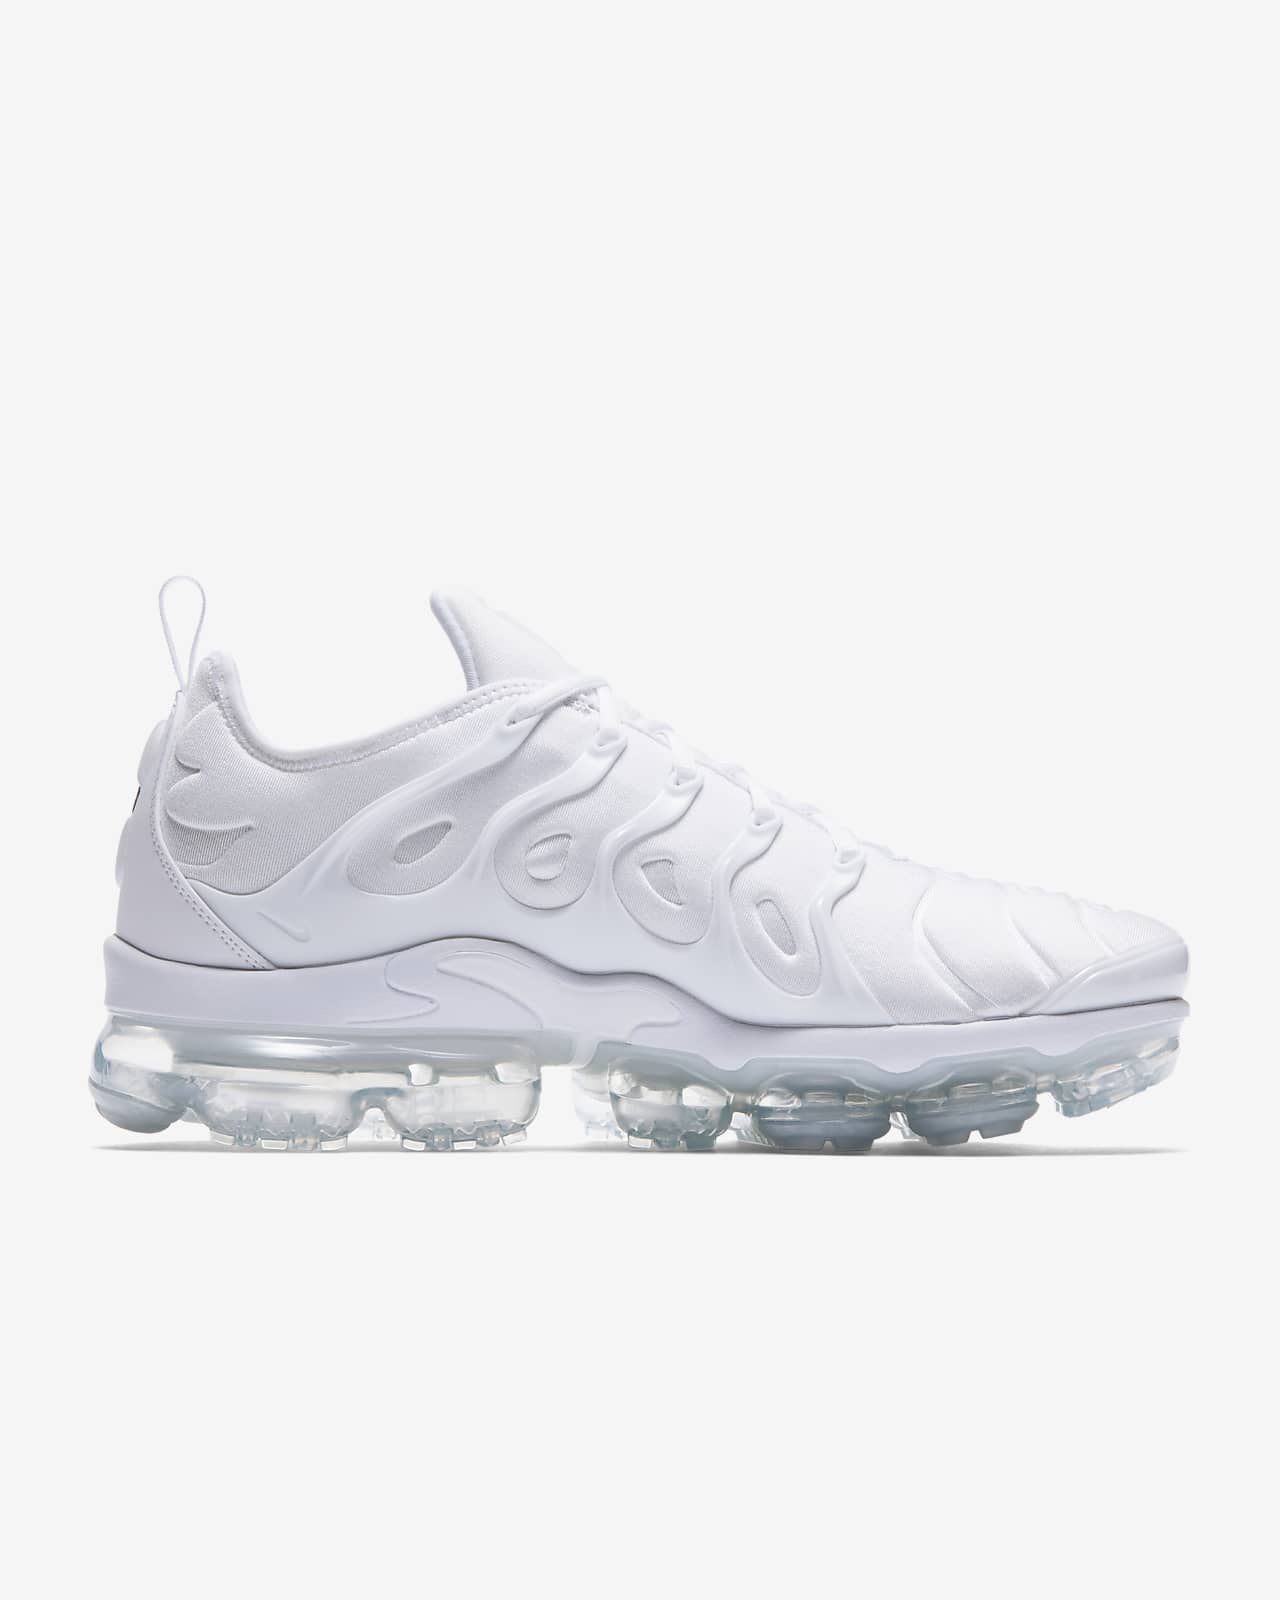 vapormax sandals price in south africa